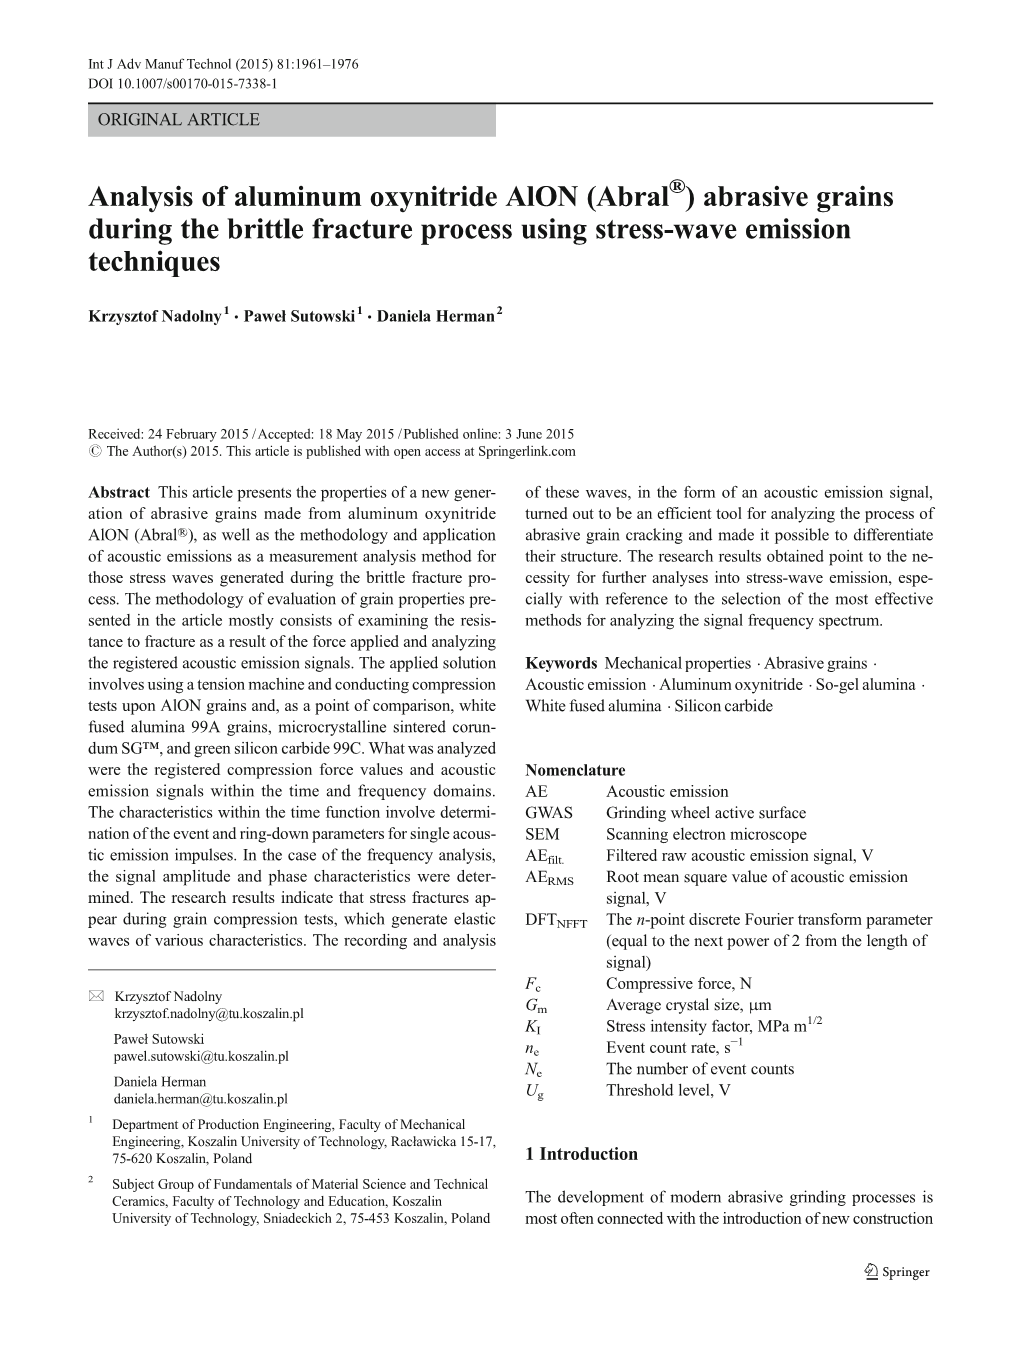 Analysis of Aluminum Oxynitride Alon (Abral®) Abrasive Grains During the Brittle Fracture Process Using Stress-Wave Emission Techniques